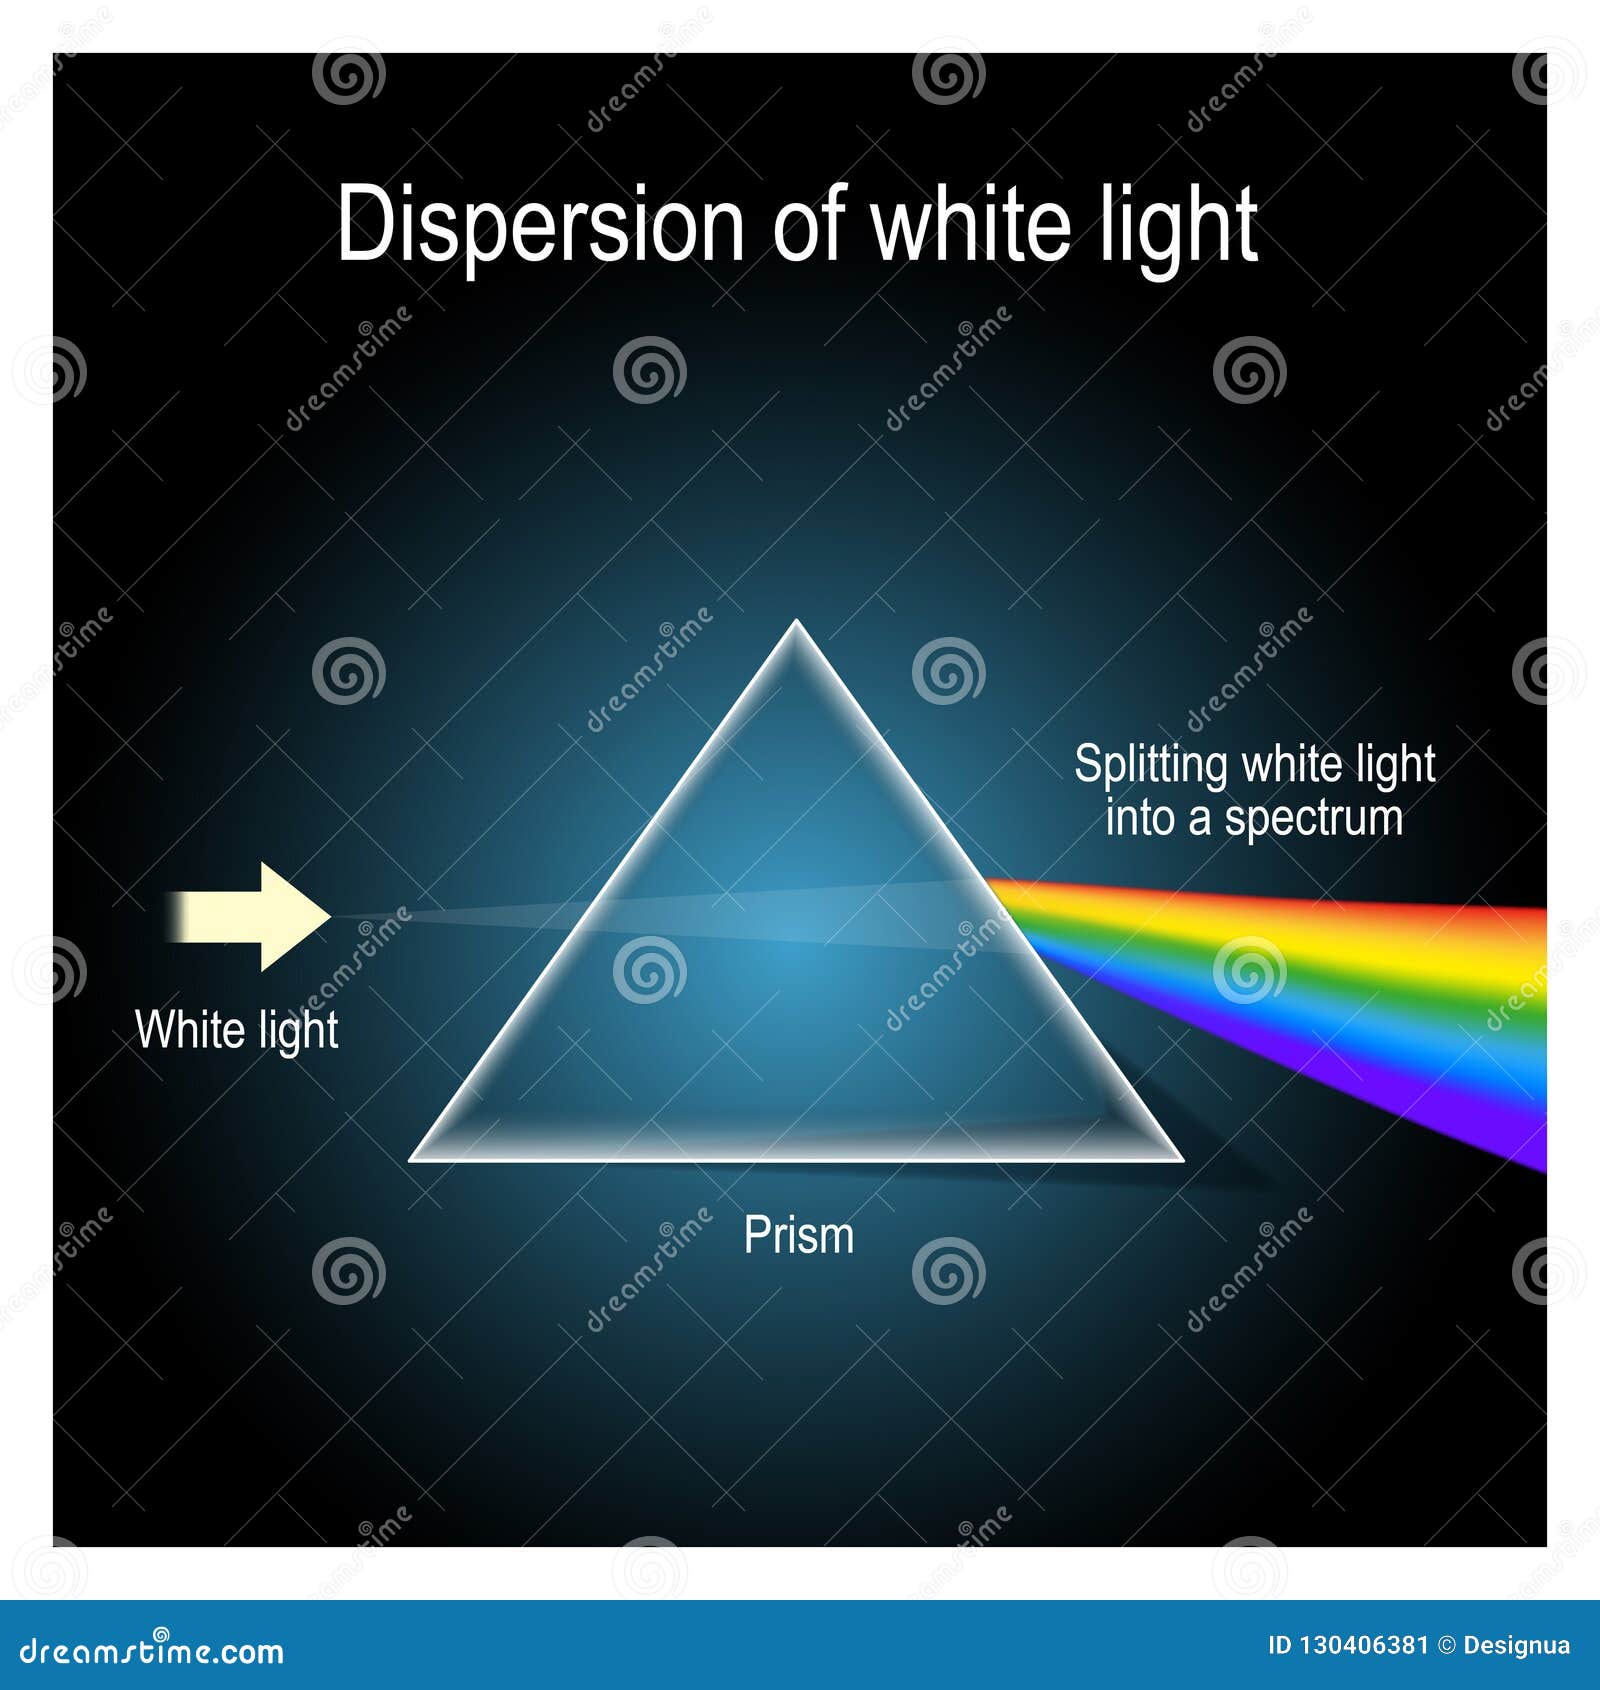 dispersion of white light in prism